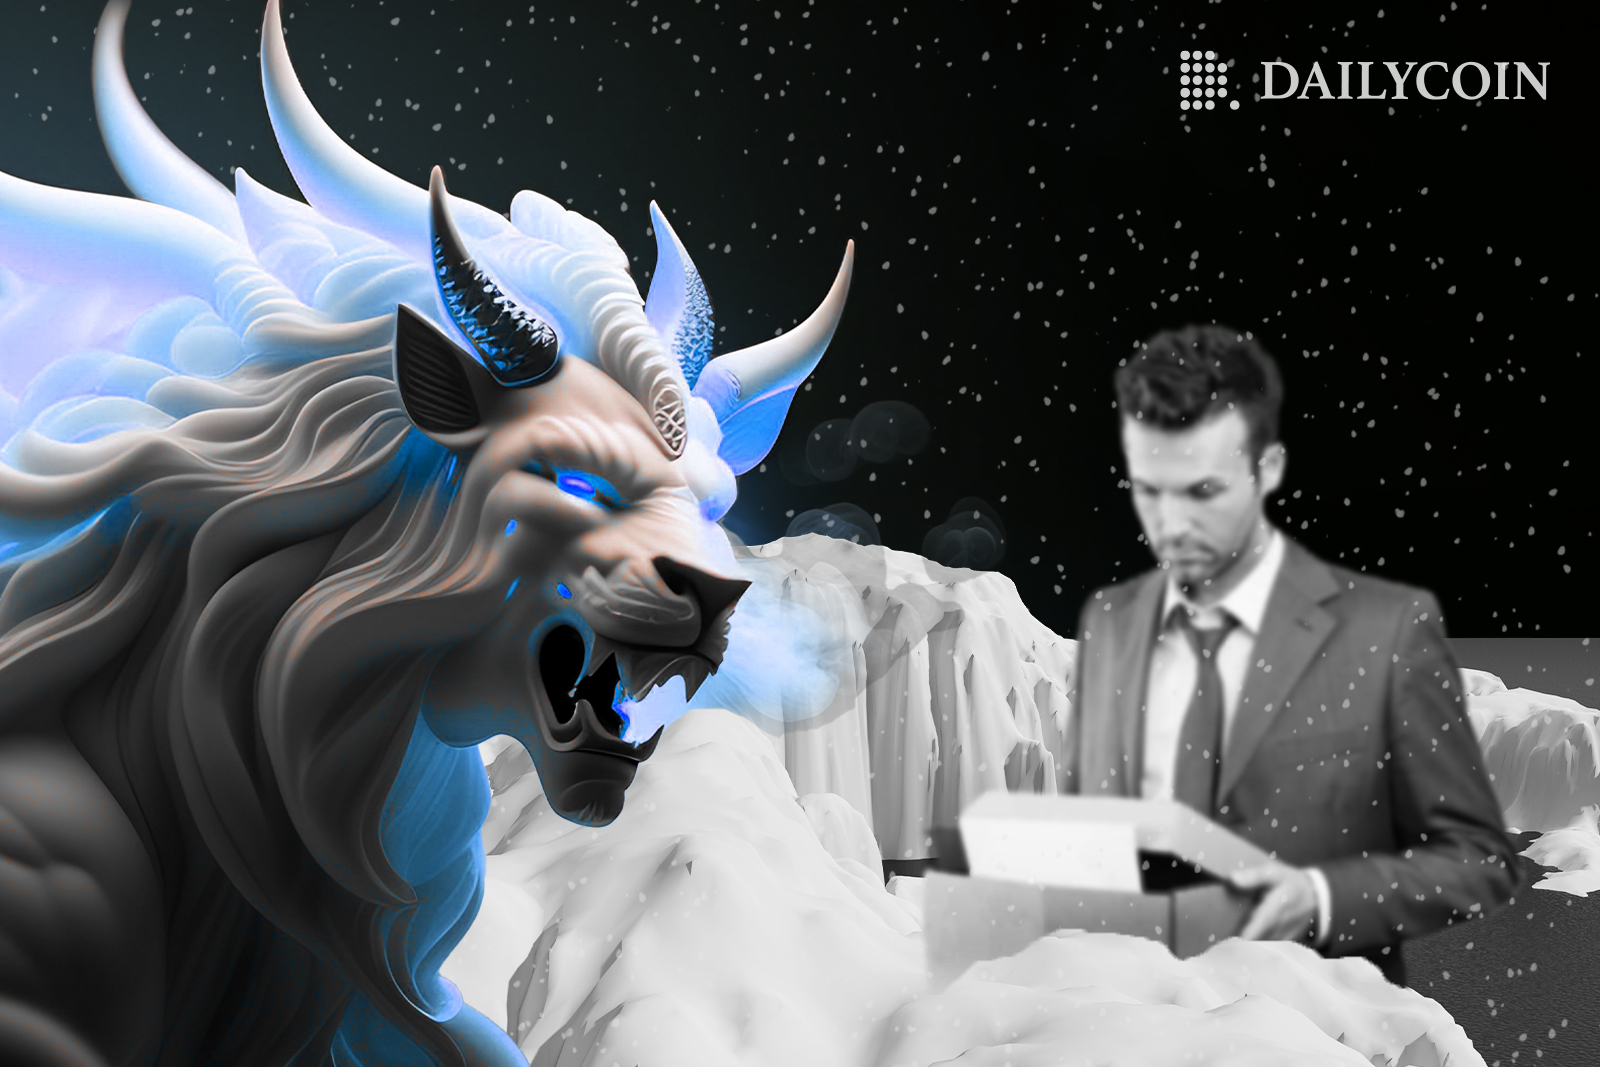 3D sculpture of a lion with blue horns next to a man during crypto winter time while Crypto.com layoffs.